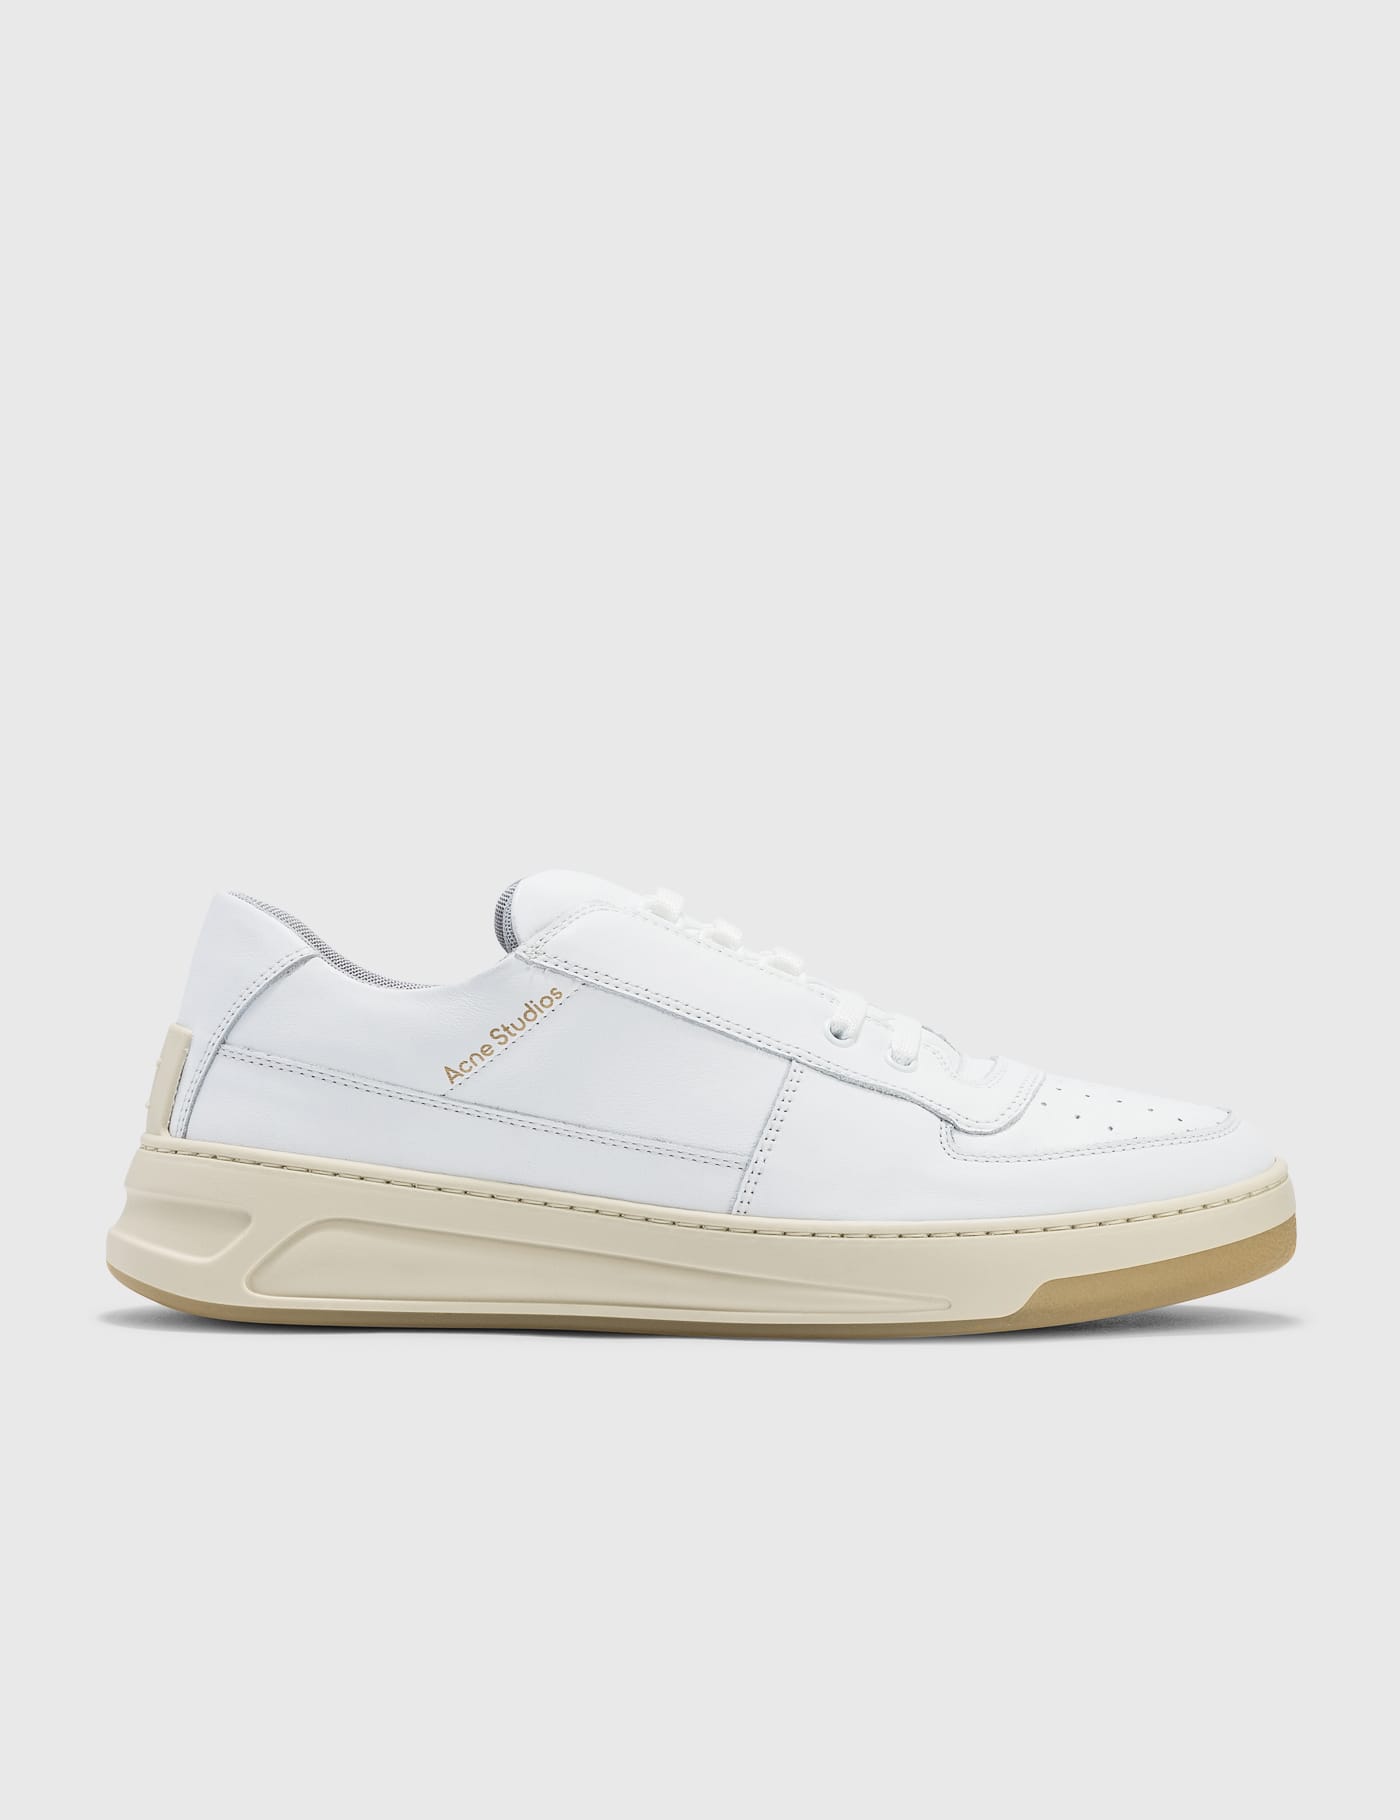 Acne Studios Perey Lace Up White スニーカー